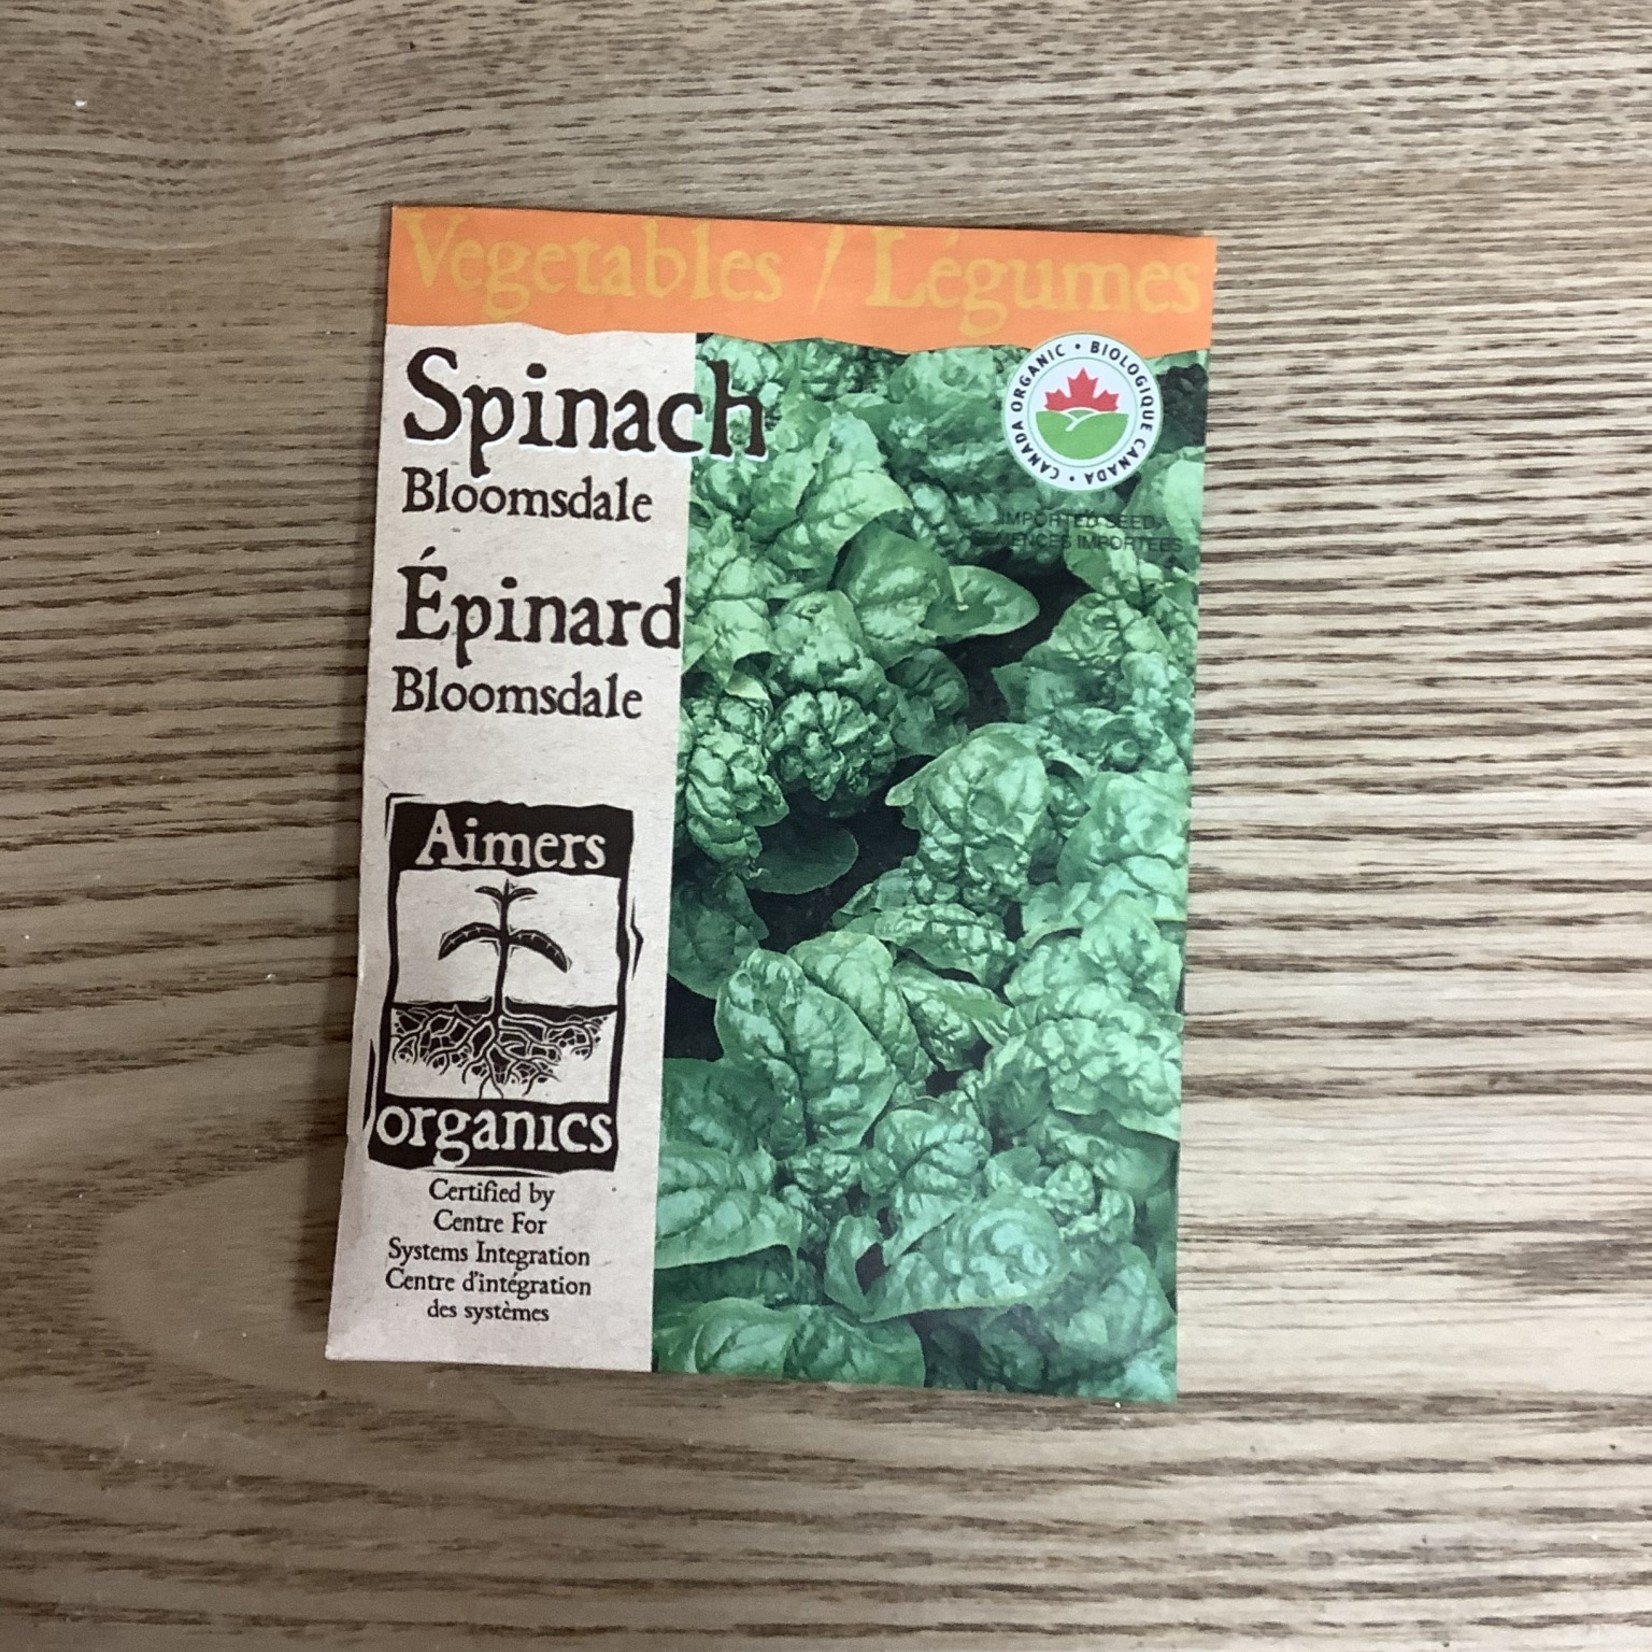 OSC Seeds Spinach "Bloomsdale" Organic Seeds